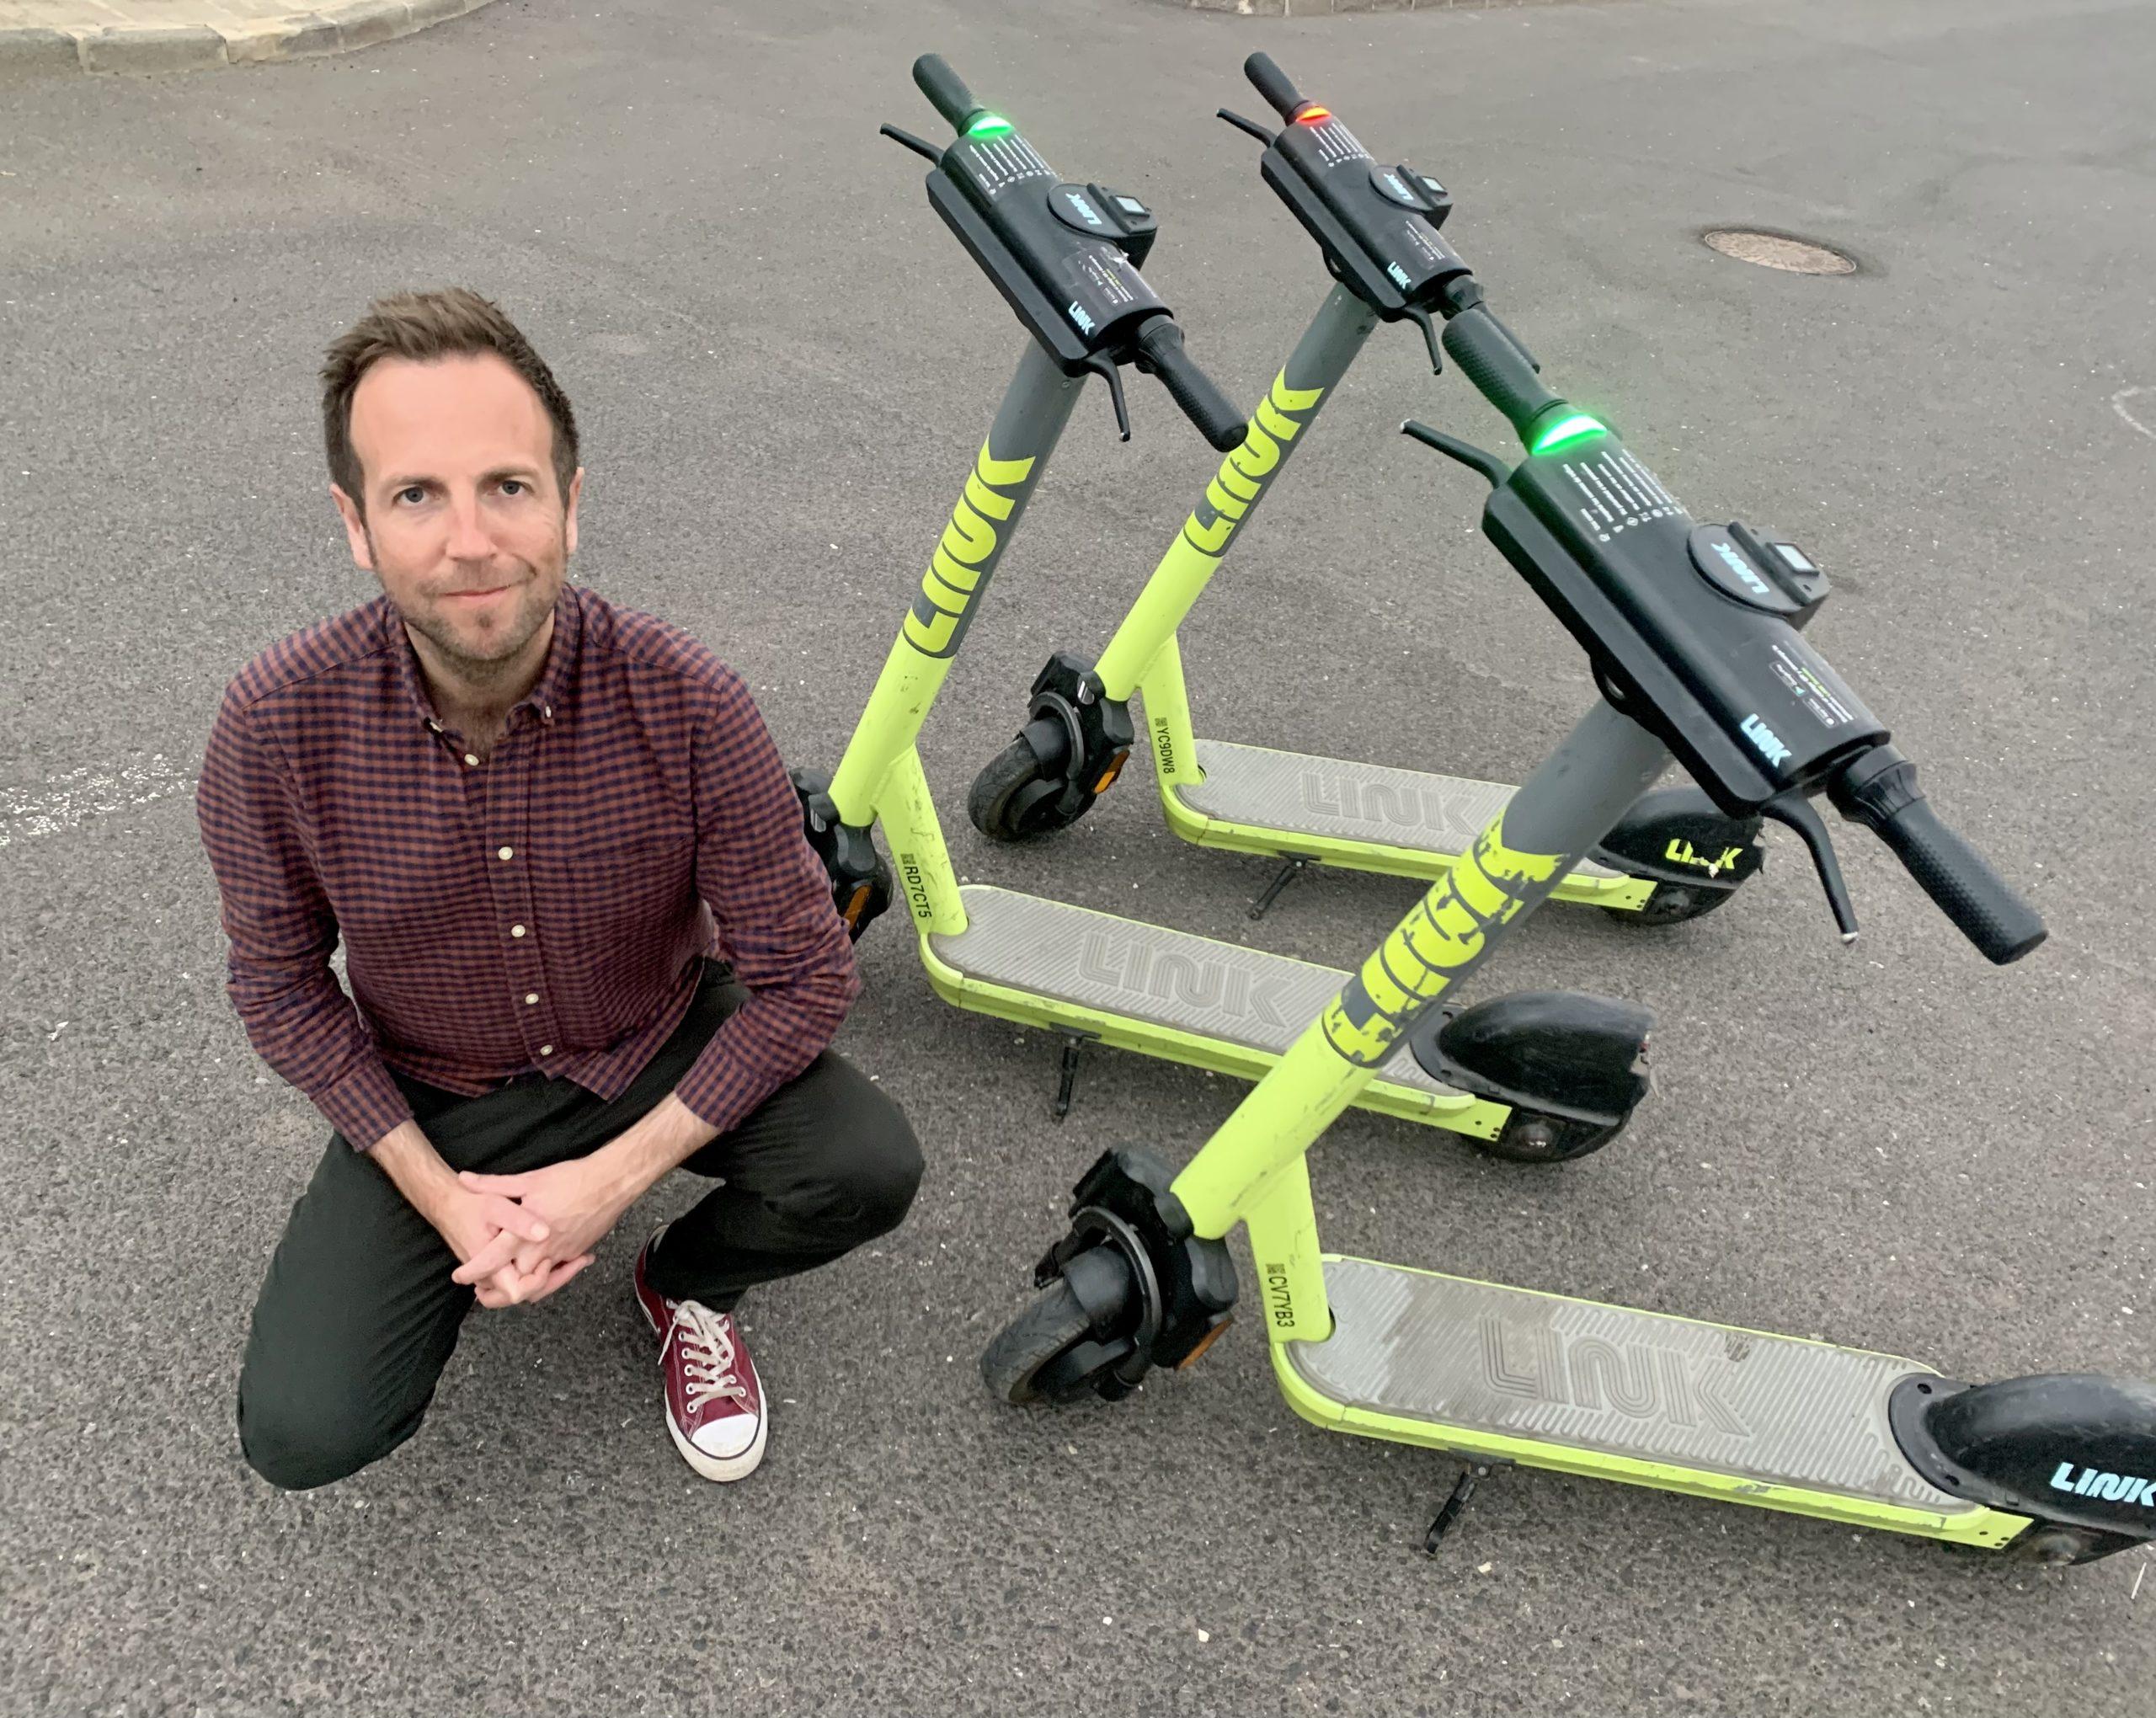 Cllr Ben Miskell with legal rental scooters which are available in some English cities